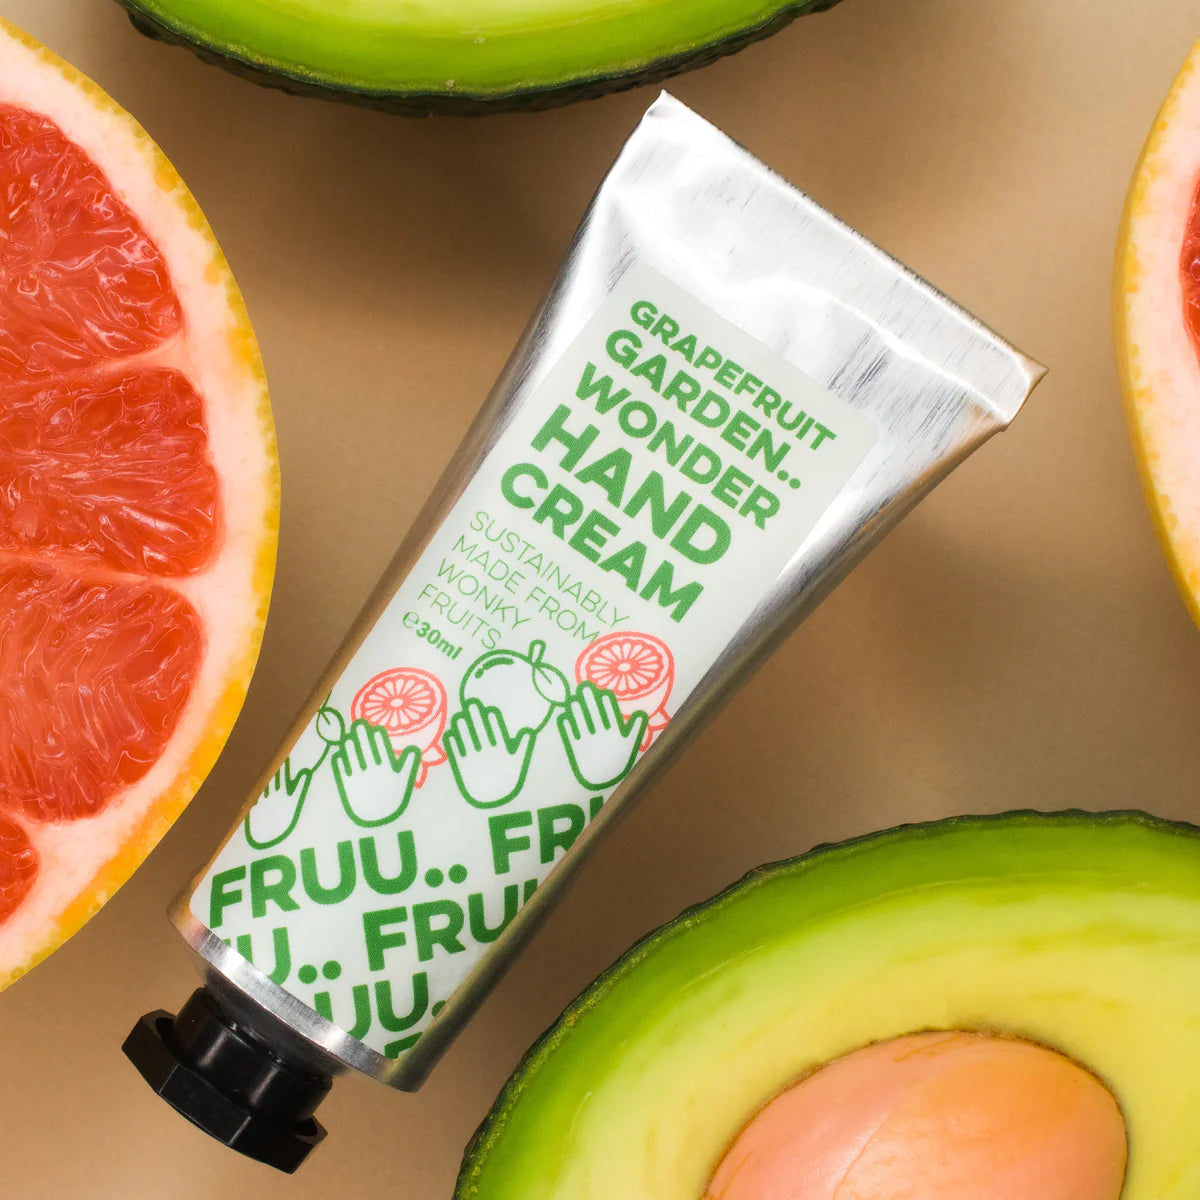 Grapefruit Garden Wonder Hand Cream Buy At Out of the Box Gifts